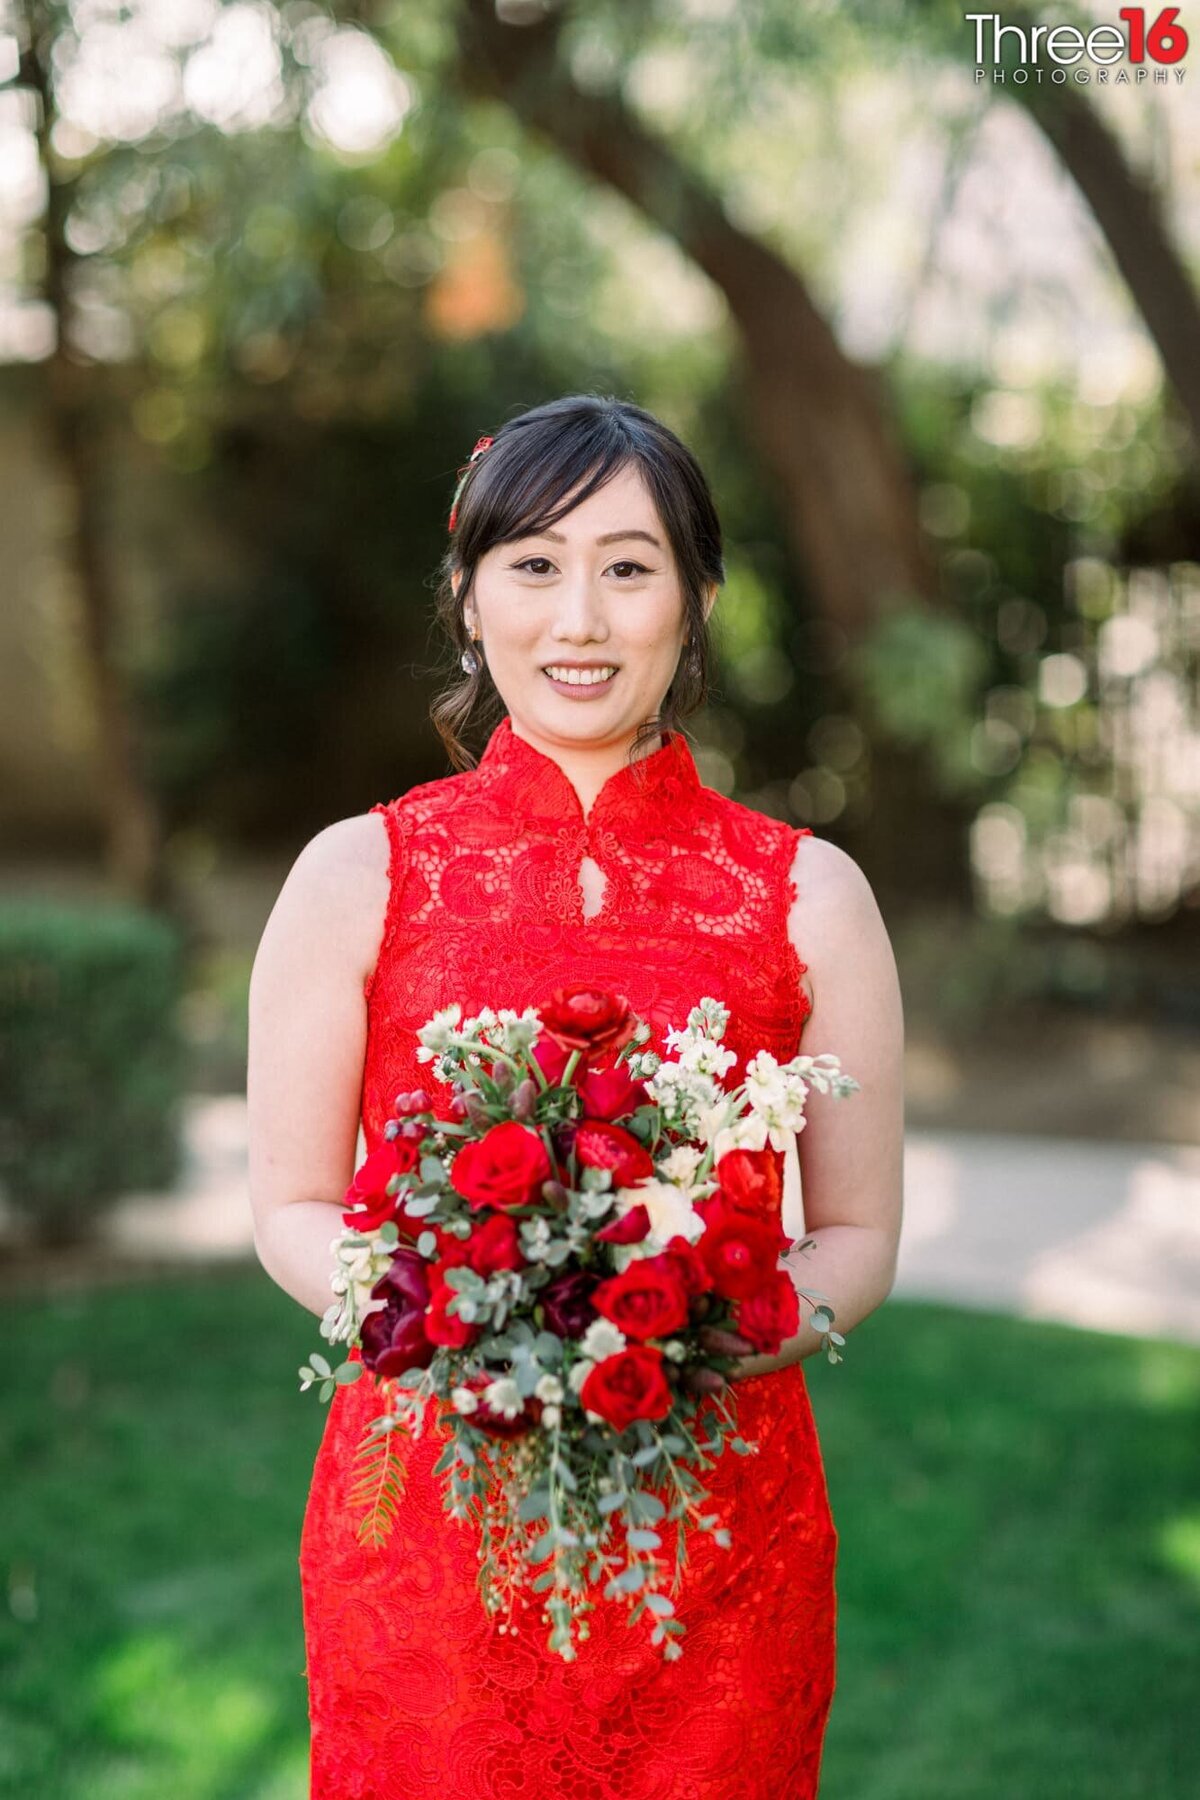 Bride posing in her stunning red gown holding her bouquet